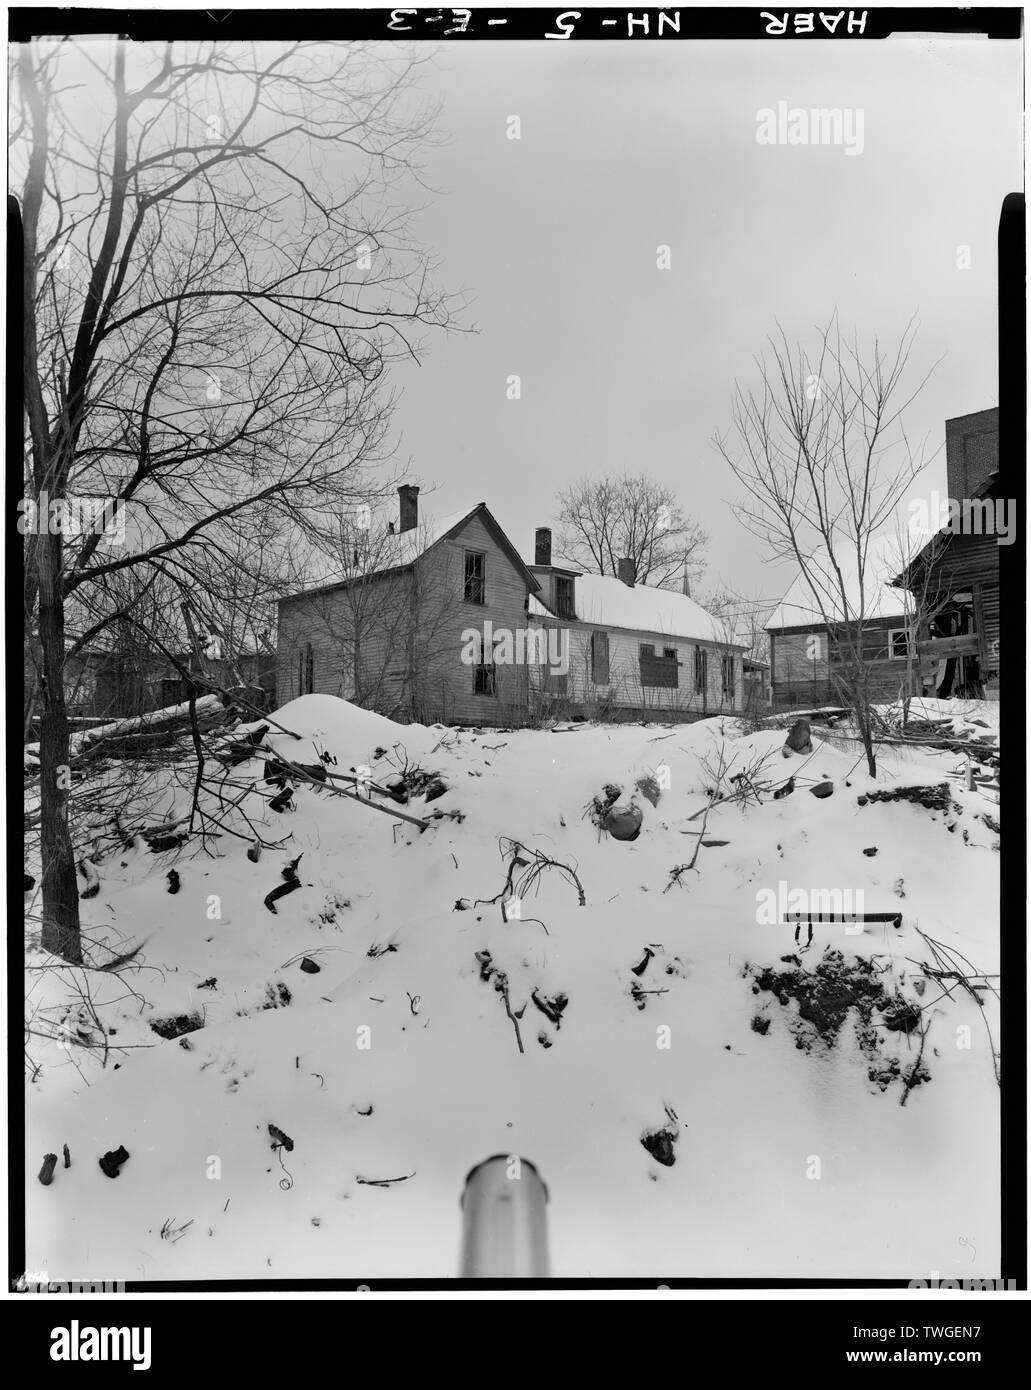 REAR VIEW. - River Street Historic District, 40-42 River Street (House), Claremont, Sullivan County, NH Stock Photo